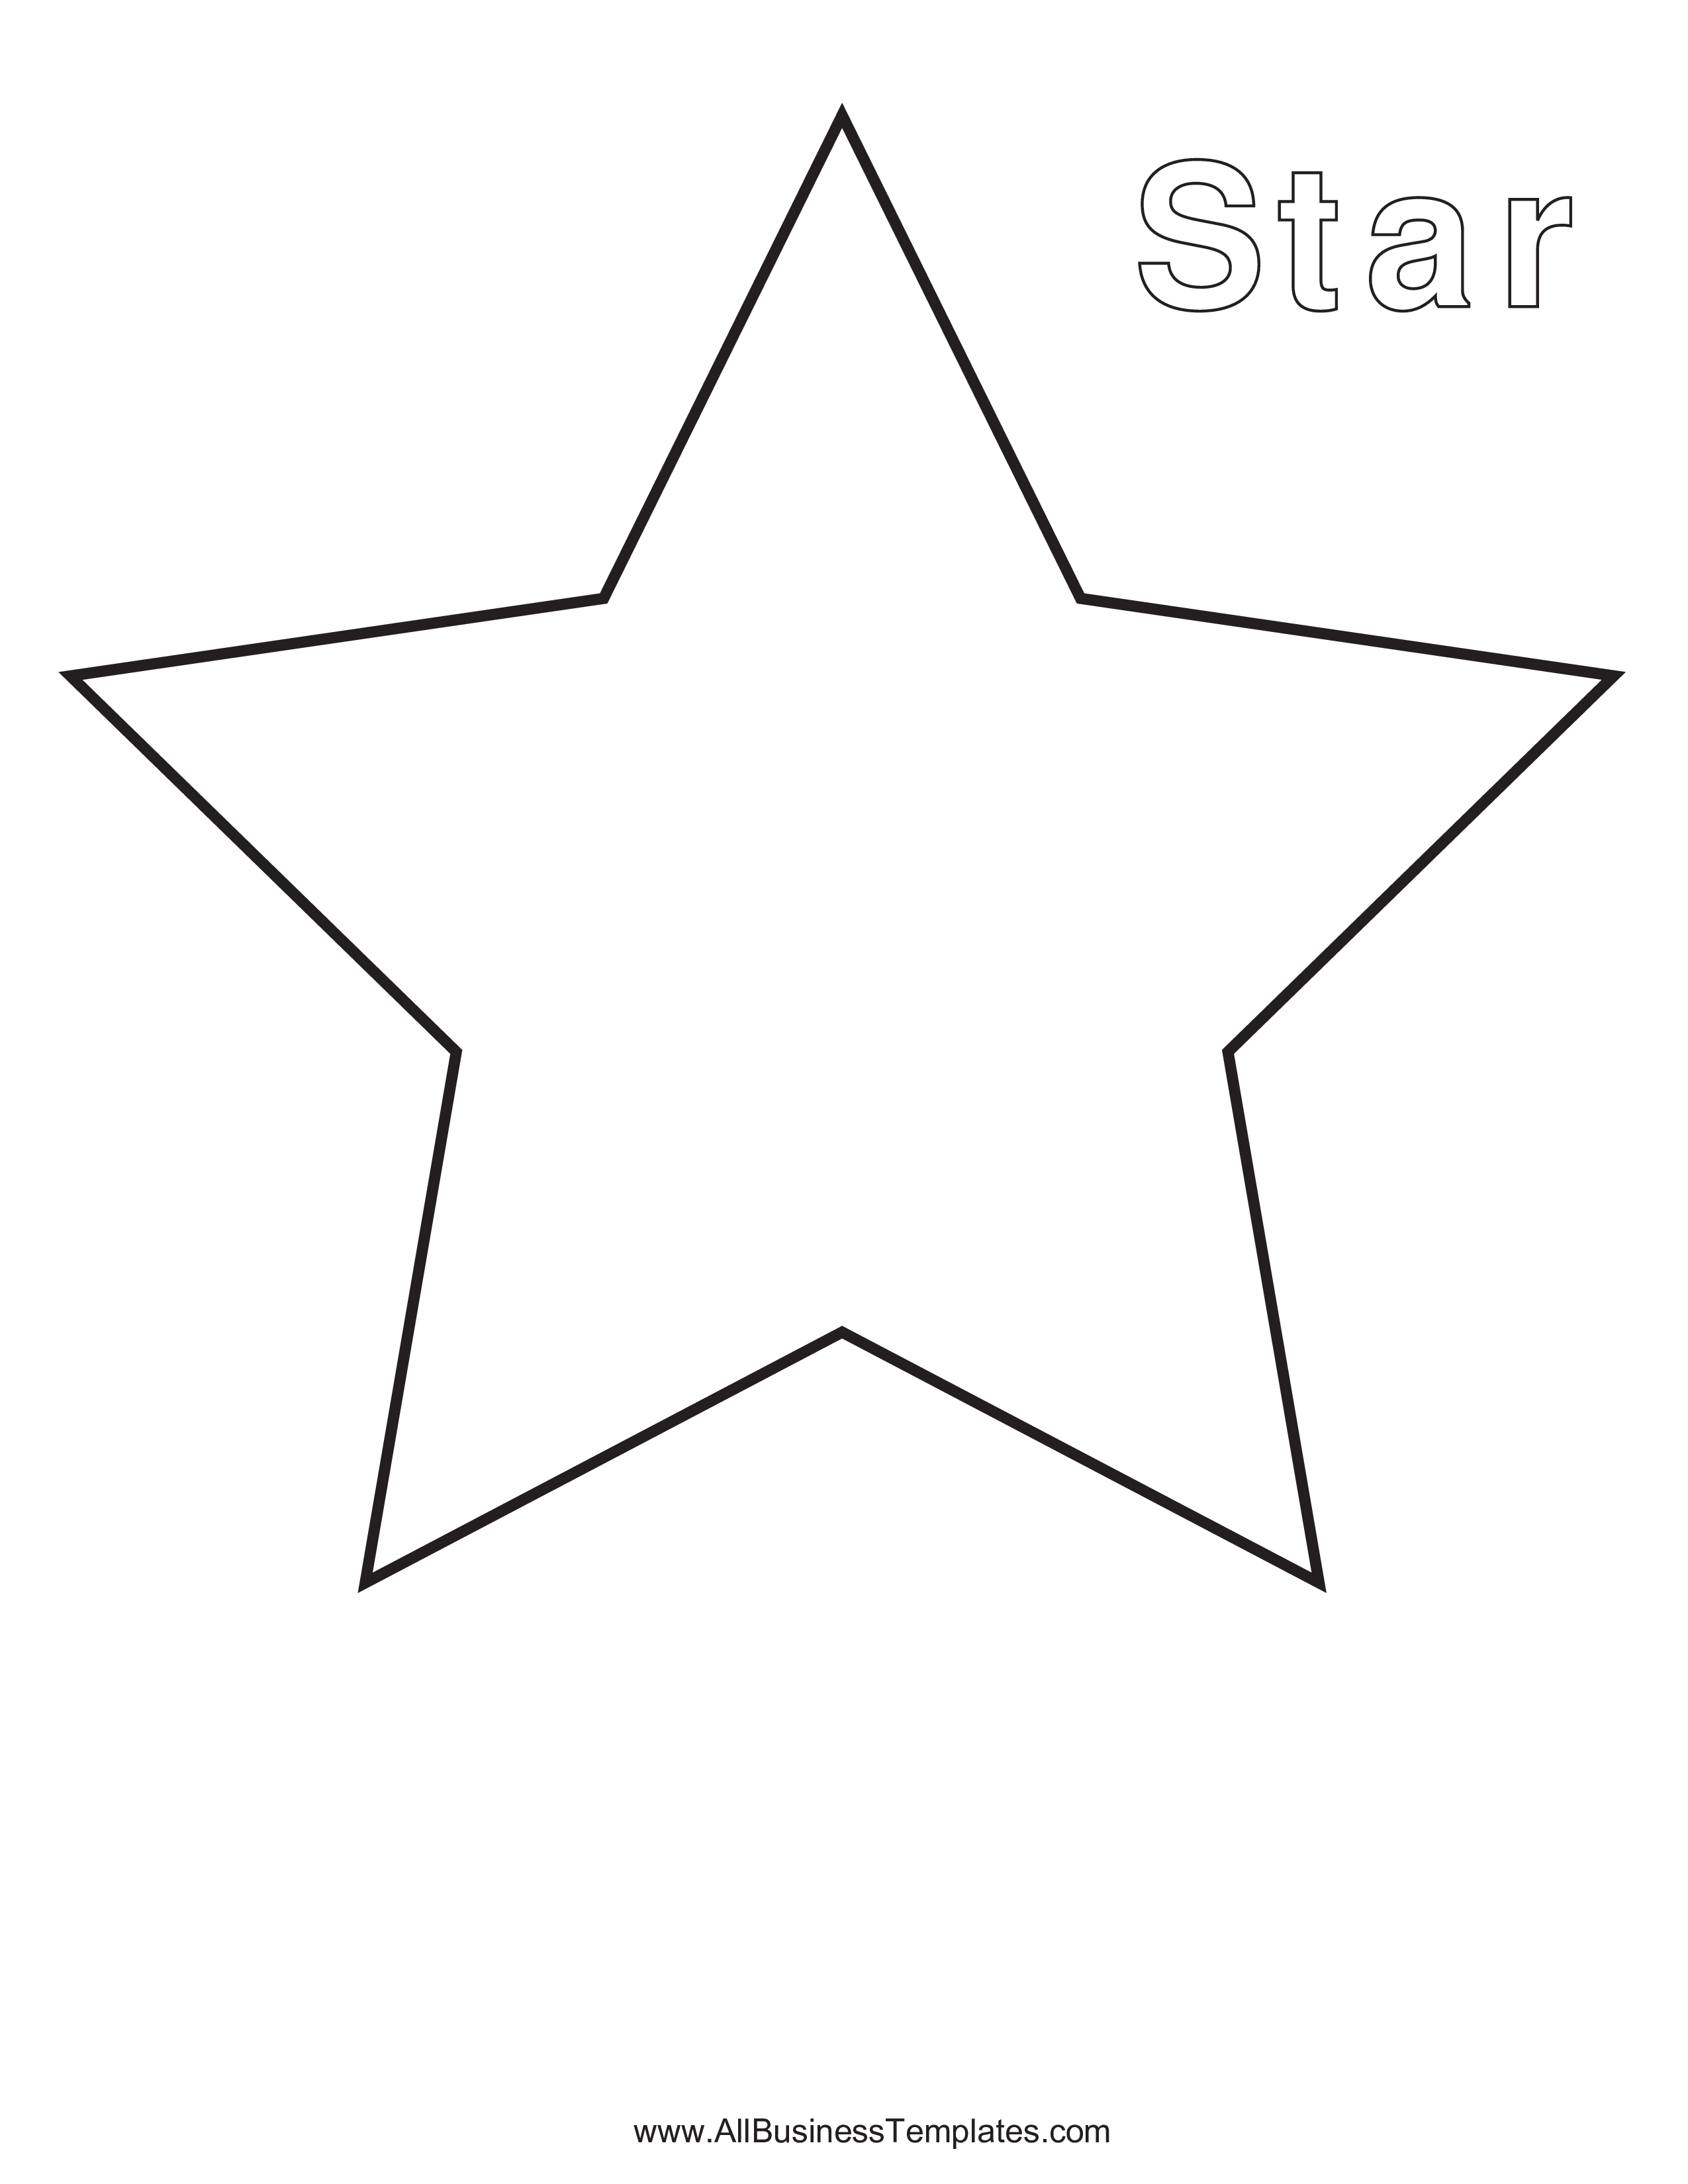 Simple Star Template | Templates at allbusinesstemplates.com2550 x 3300